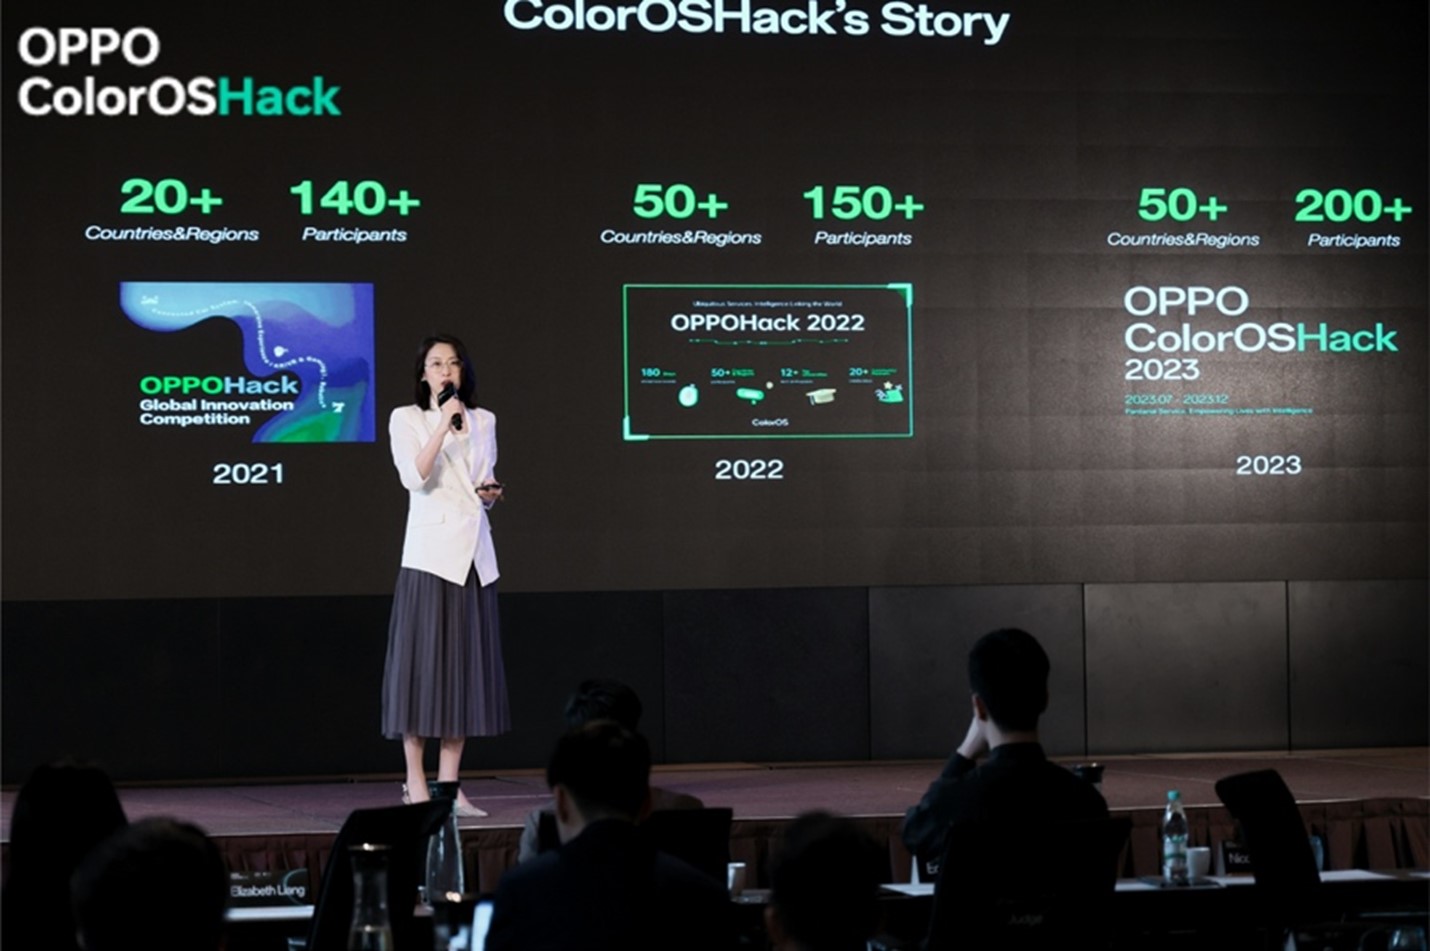 OPPO ColorOSHack 2023 attracted more than 200 participants from over 50 countries